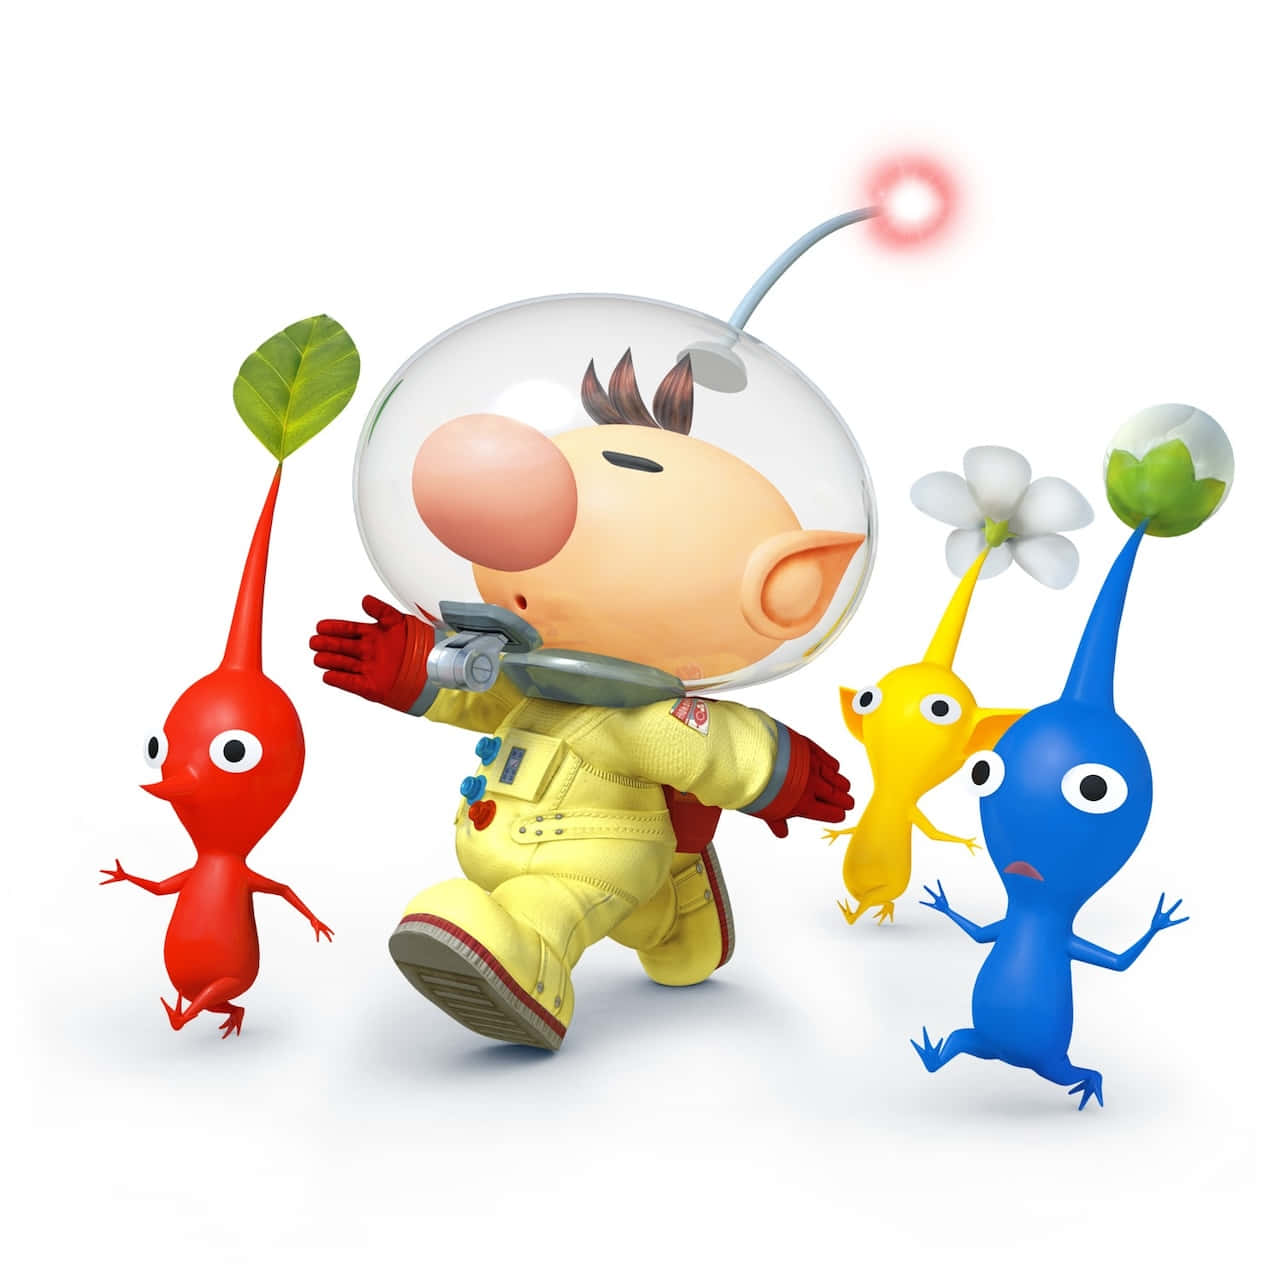 Pikminand Astronaut Character Wallpaper